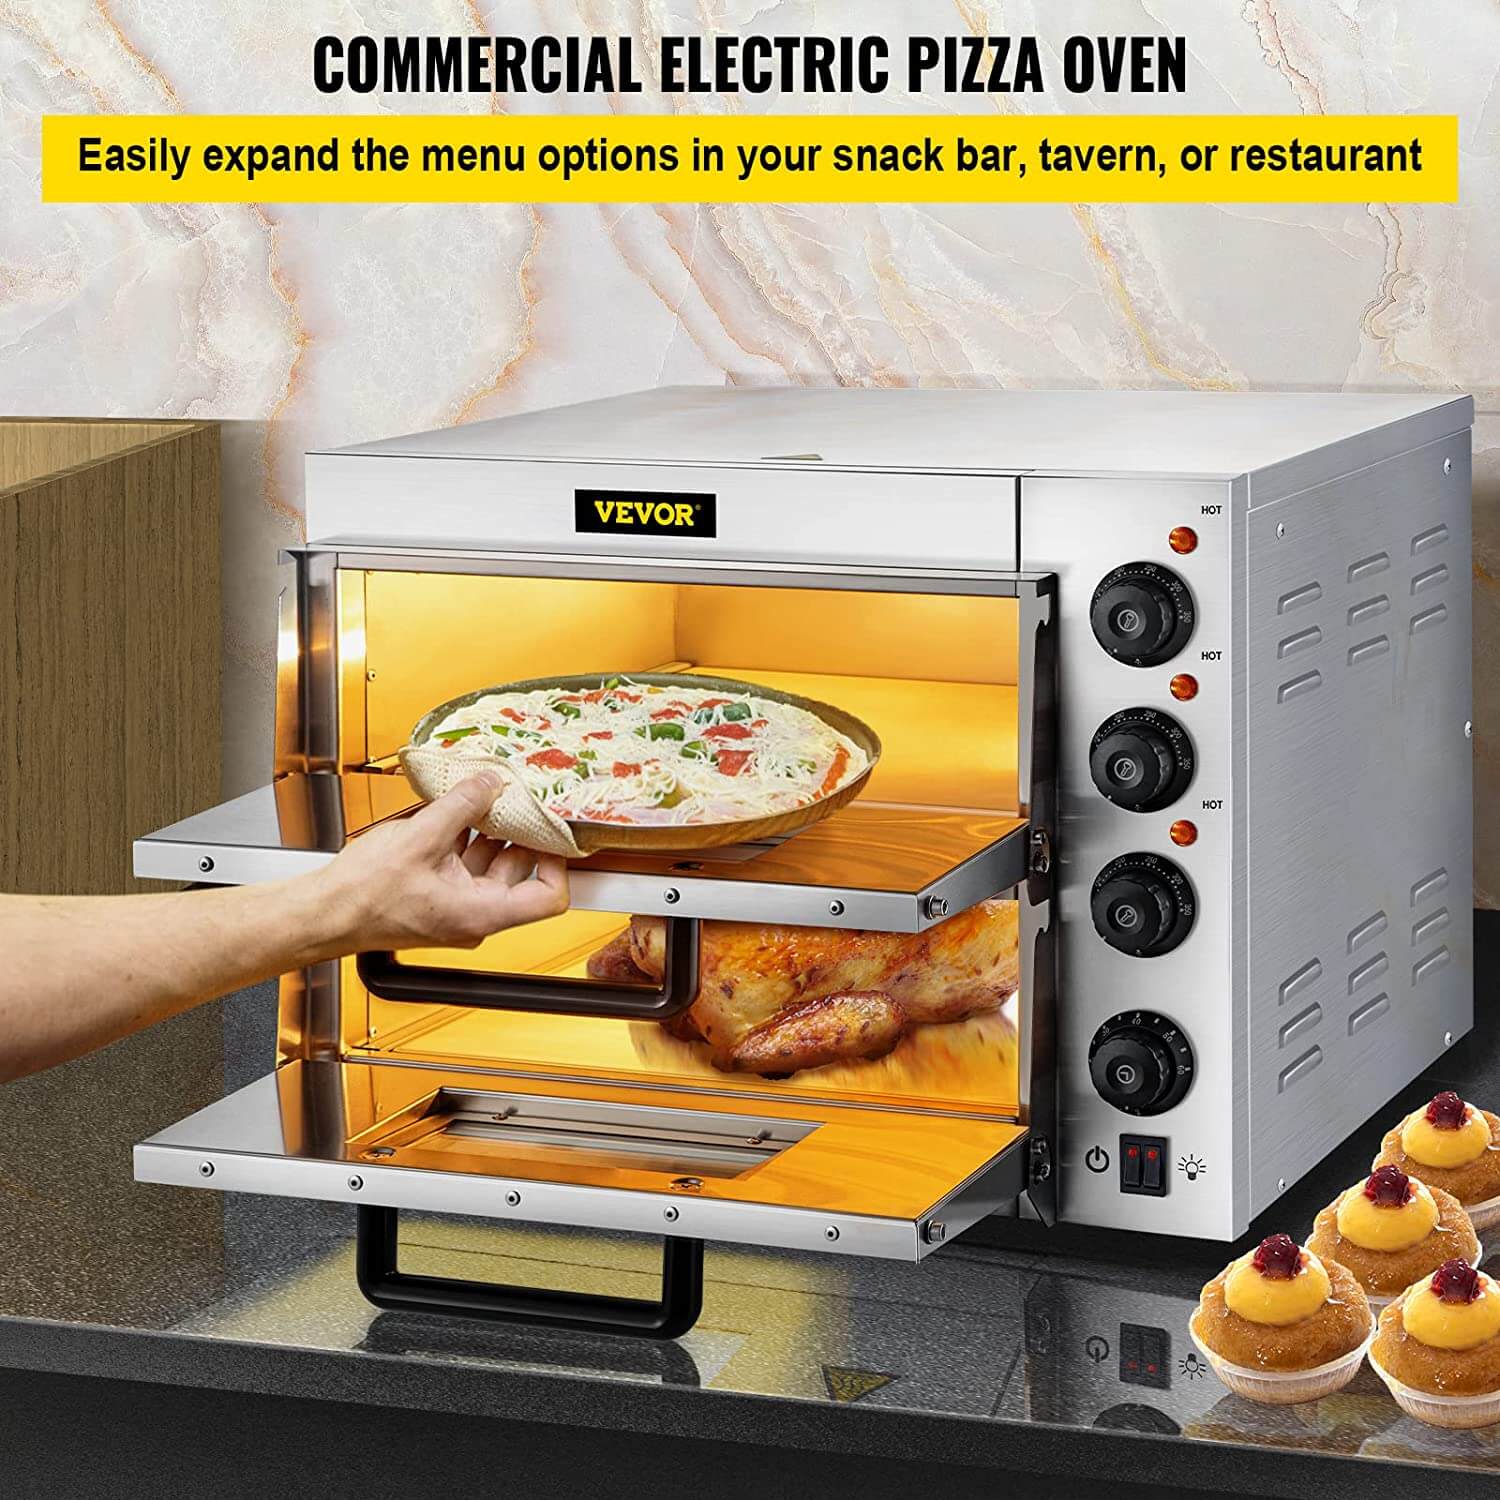 Commercial Pizza Oven Options Available to You